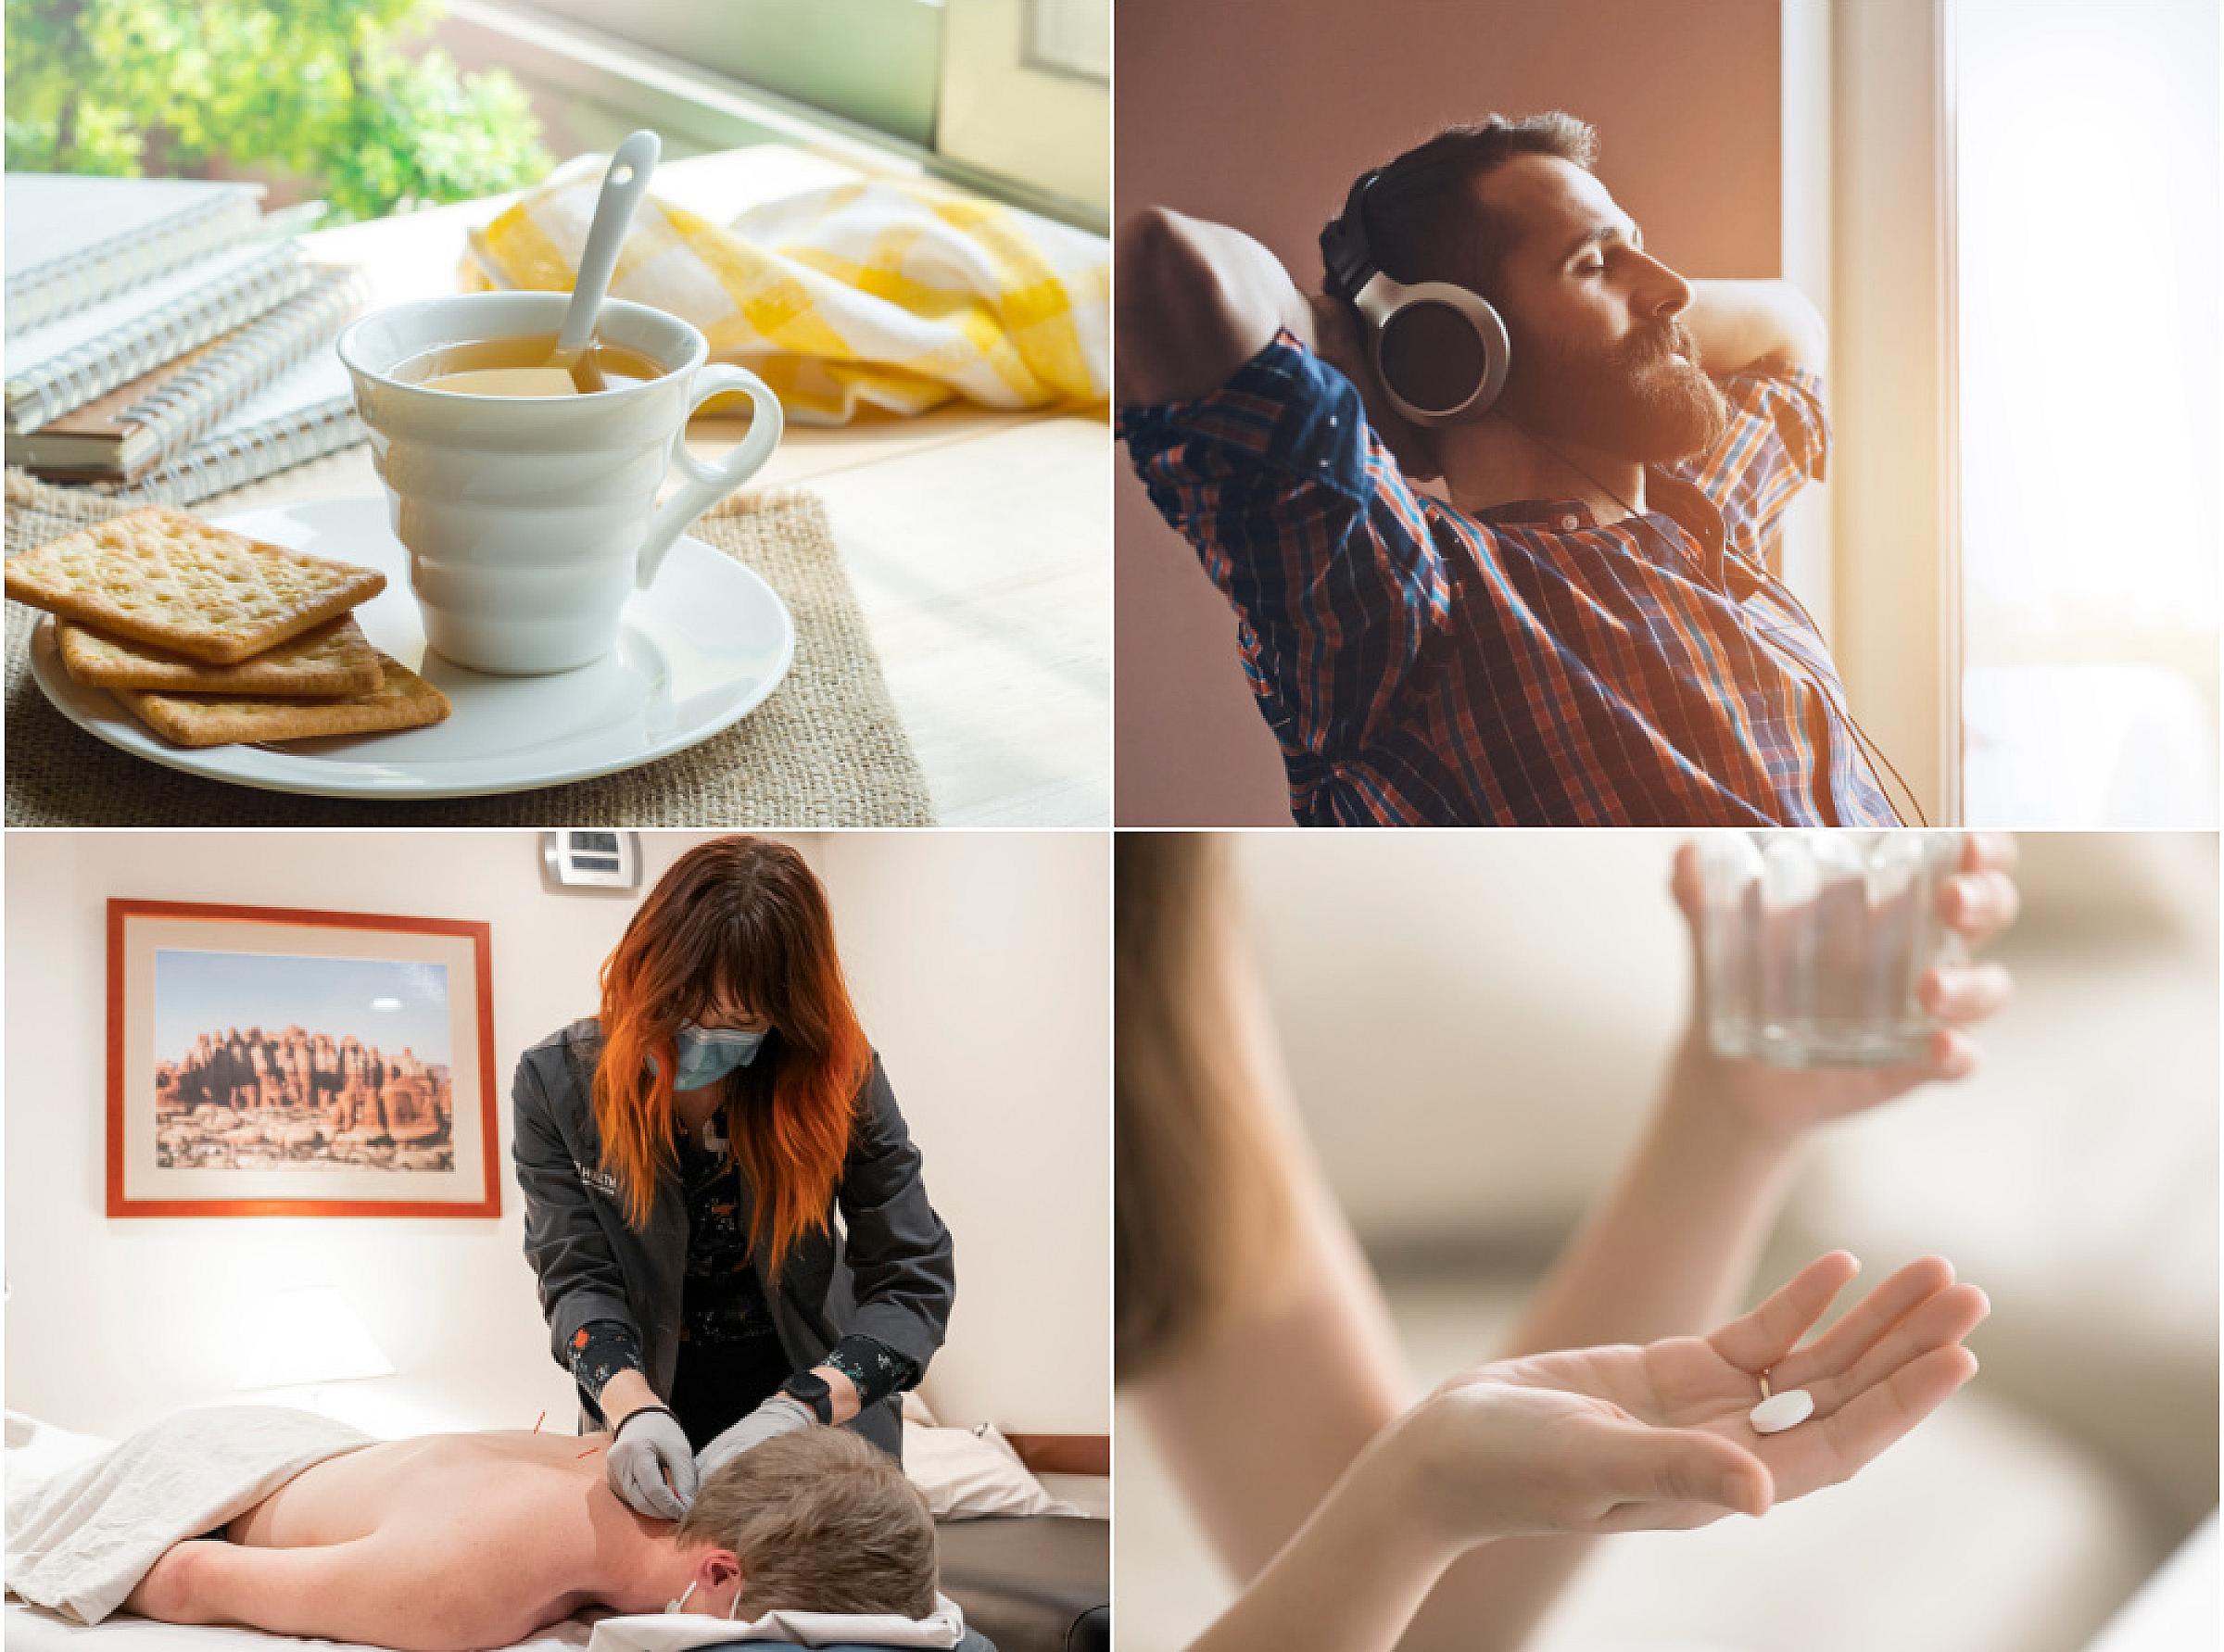 Photo collage of a cup of tea, a man listening to music, a patient receiving acupuncture, and a woman taking a pill